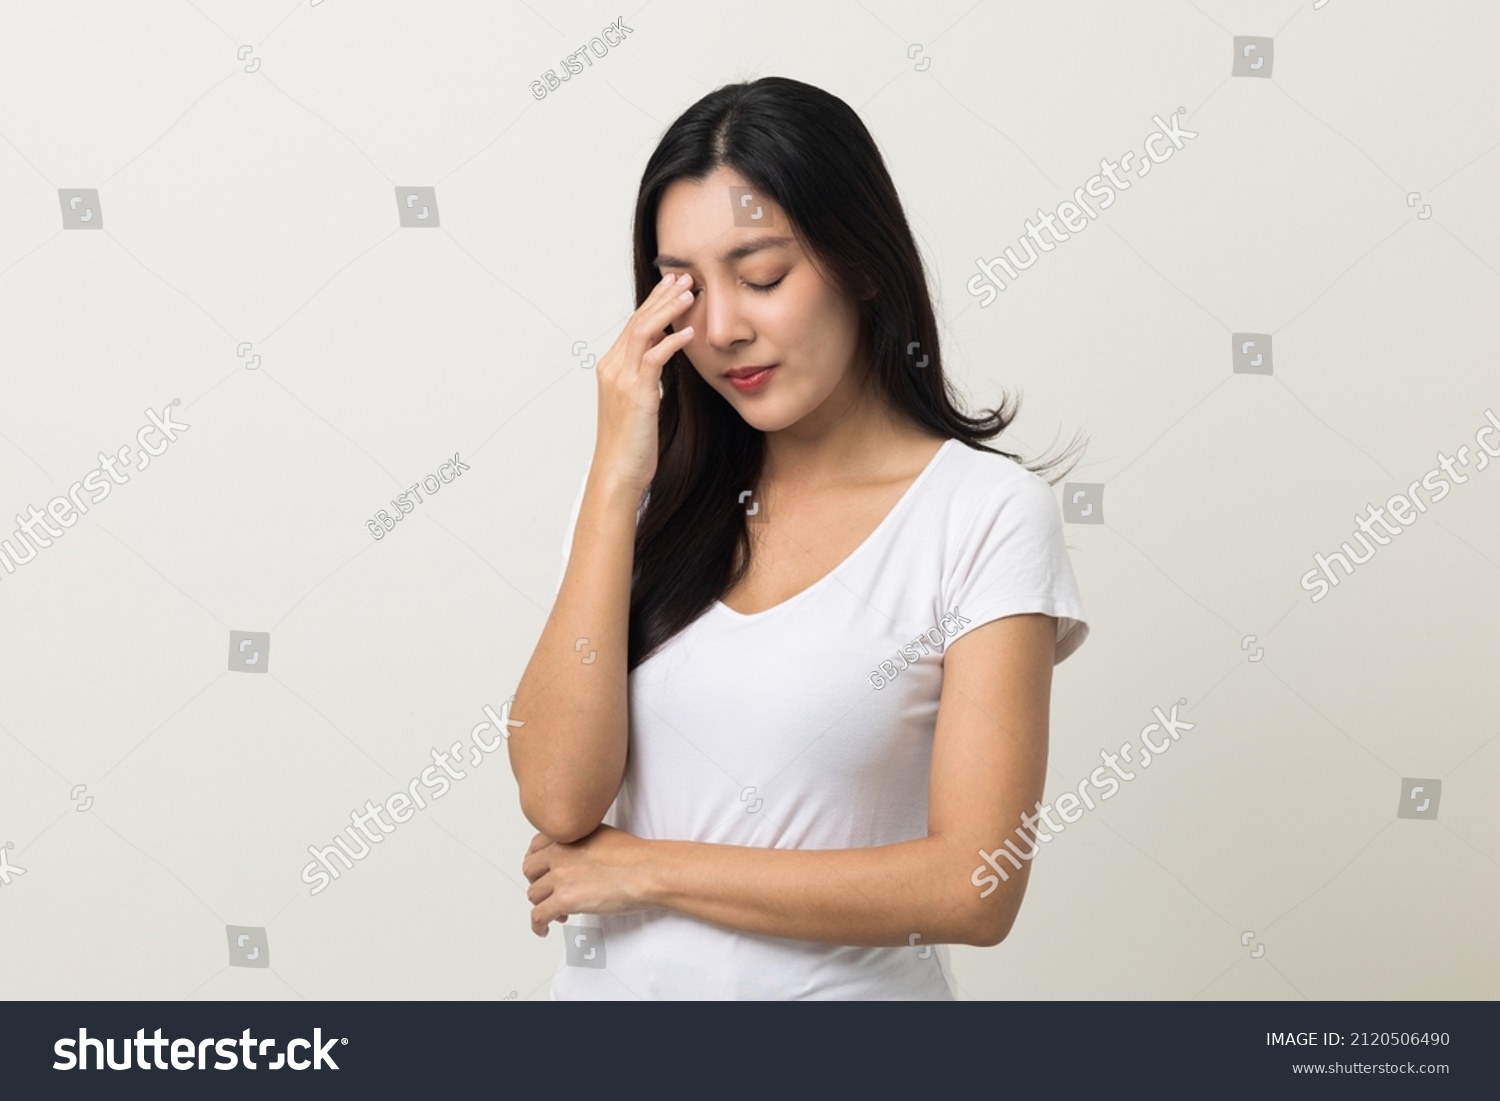 Young asian beautiful woman hand rubbing eyes she's feeling depressed stress headache be tired from working standing on isolated white background she has health problems. #2120506490